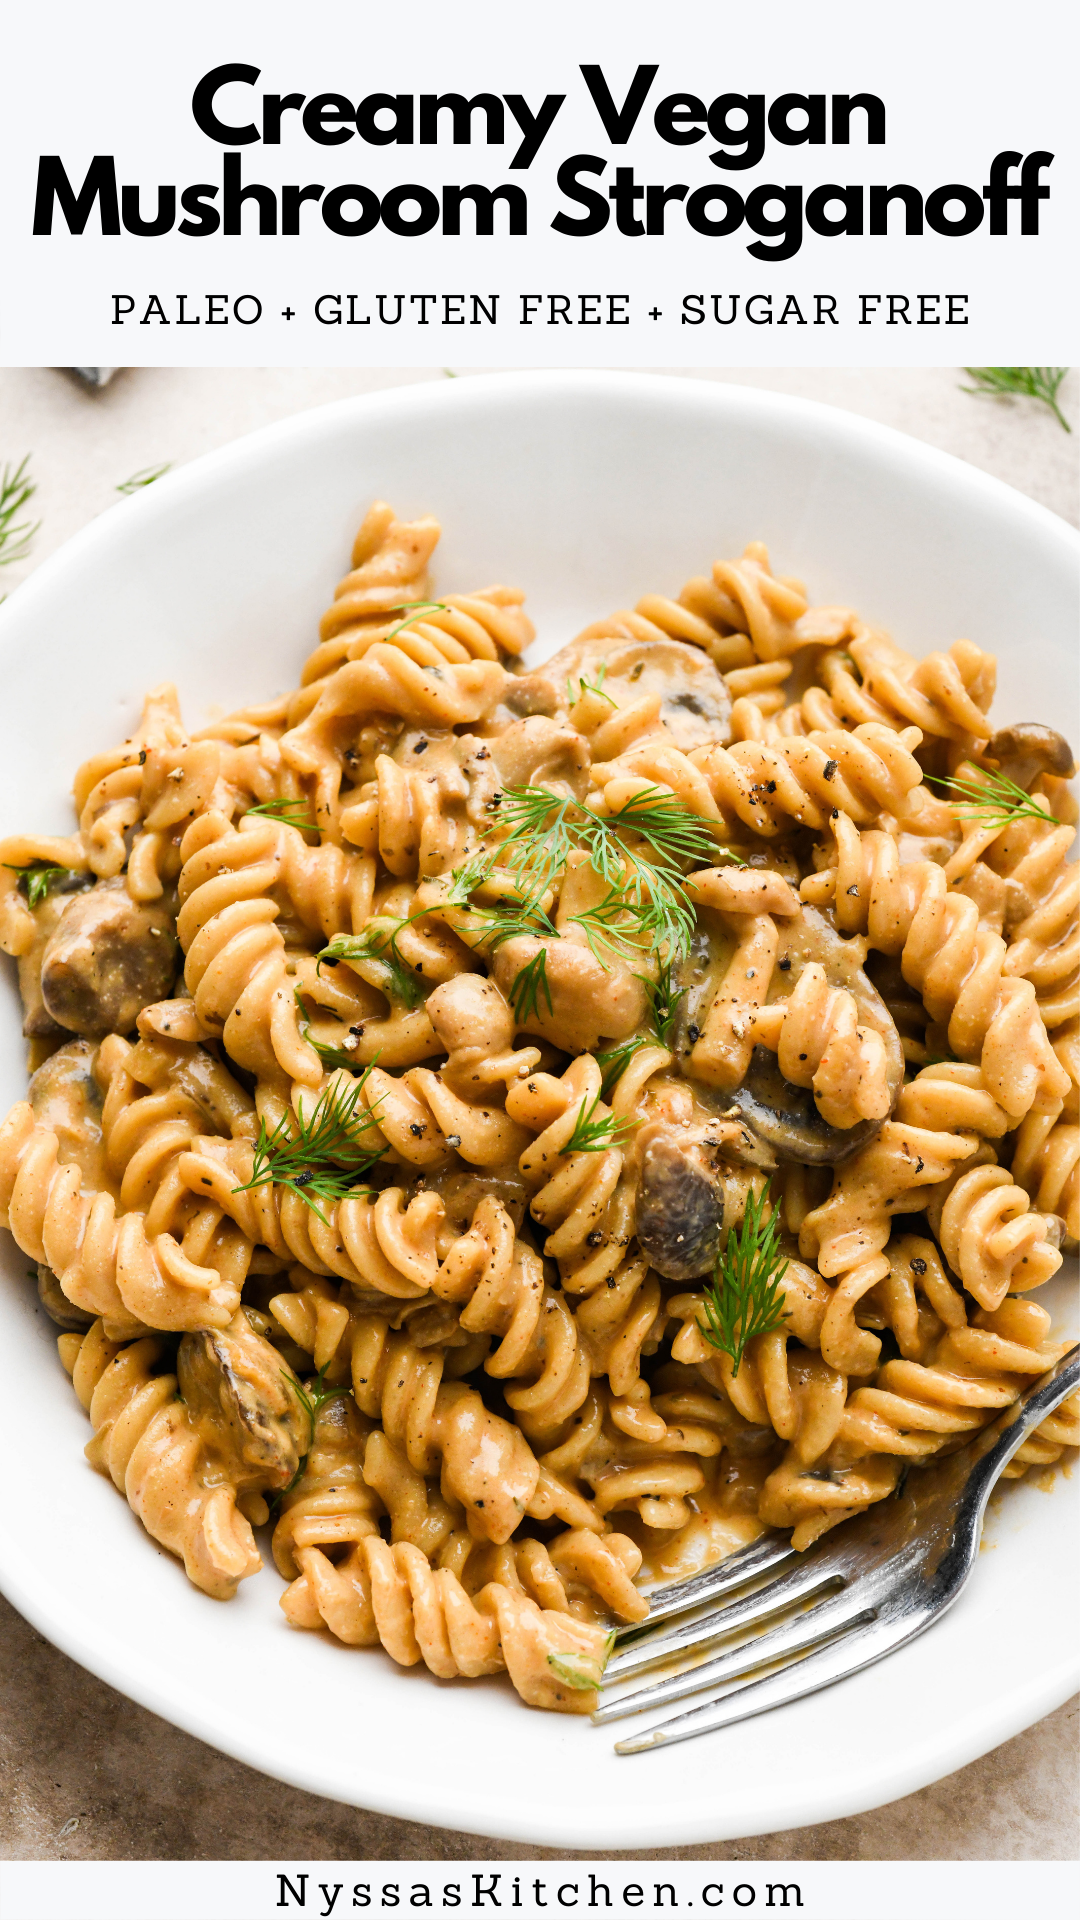 This creamy vegan mushroom stroganoff is a healthy spin on a comfort food classic! Made with real food ingredients and the creamiest mushroom sauce - a flavorful meal that the whole family will love! Perfect for weeknight cooking or meatless Monday. Vegan, vegetarian, and gluten free.